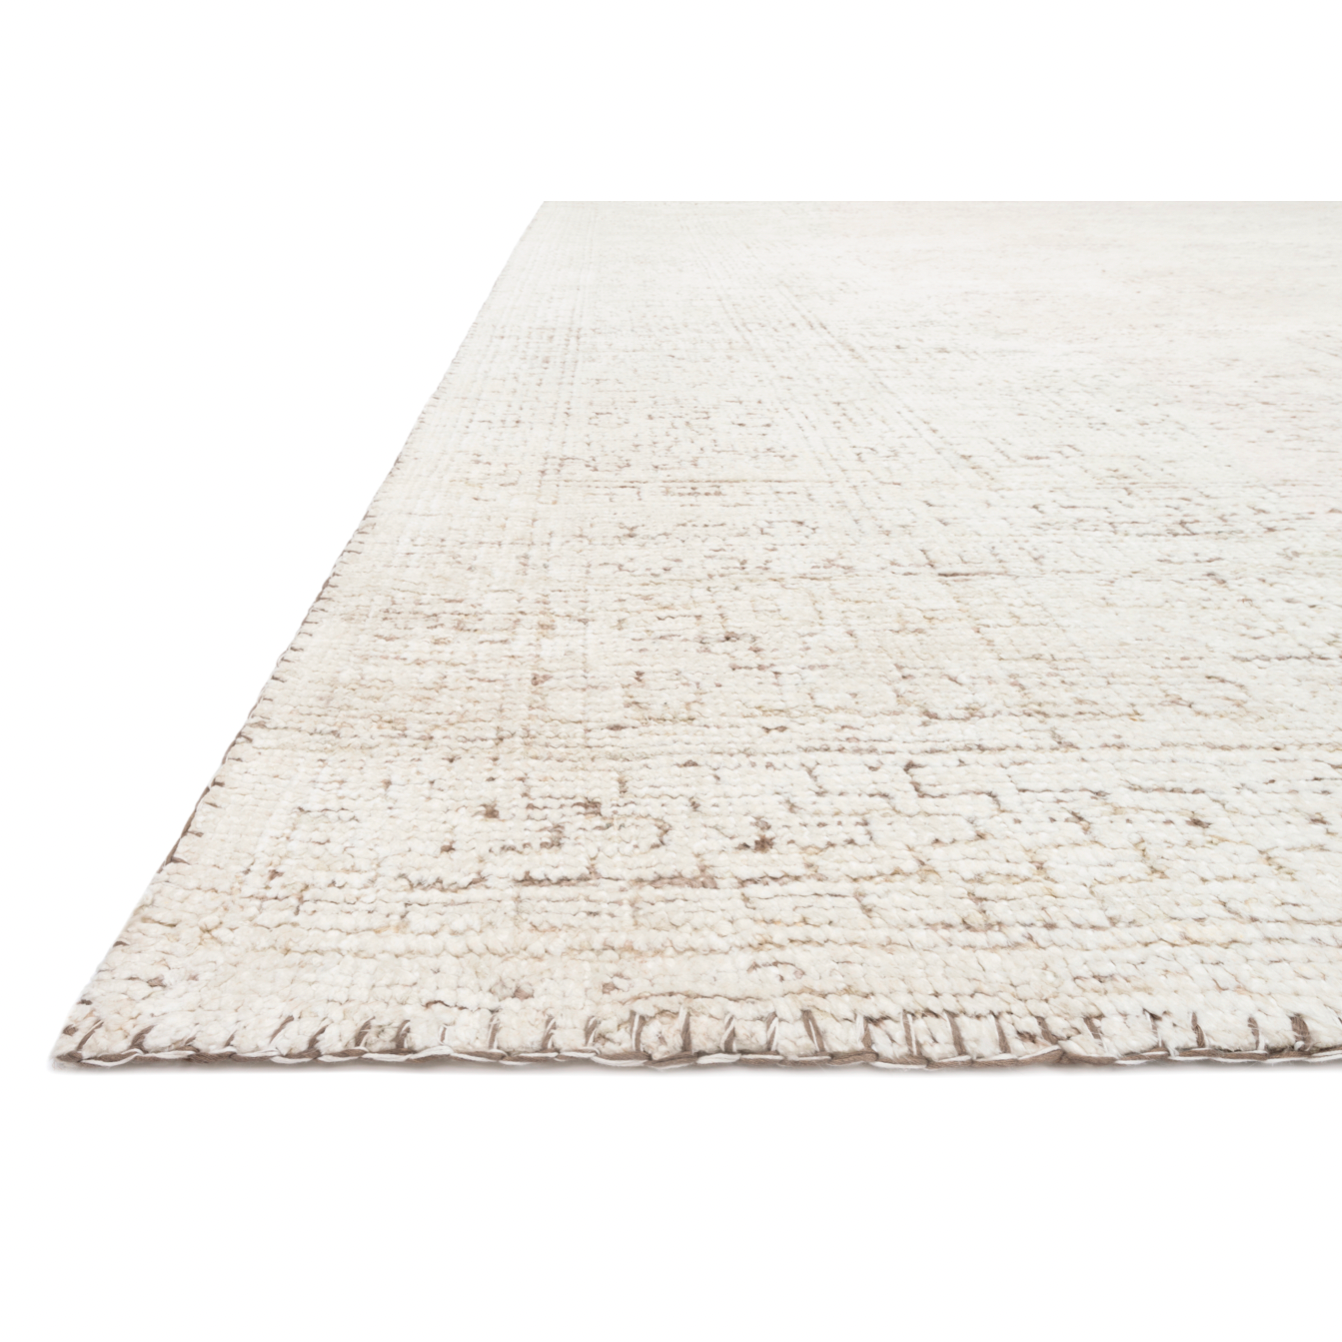 Hand-knotted in India of viscose and cotton, the Vestige White / Natural Area Rug recalls ancient khotan rugs in an updated color palette. Soft underfoot, the silken yarns temper the graphic motifs to create a versatile foundation.  Hand Knotted 89% Viscose | 11% Cotton VQ-01 White / Natural